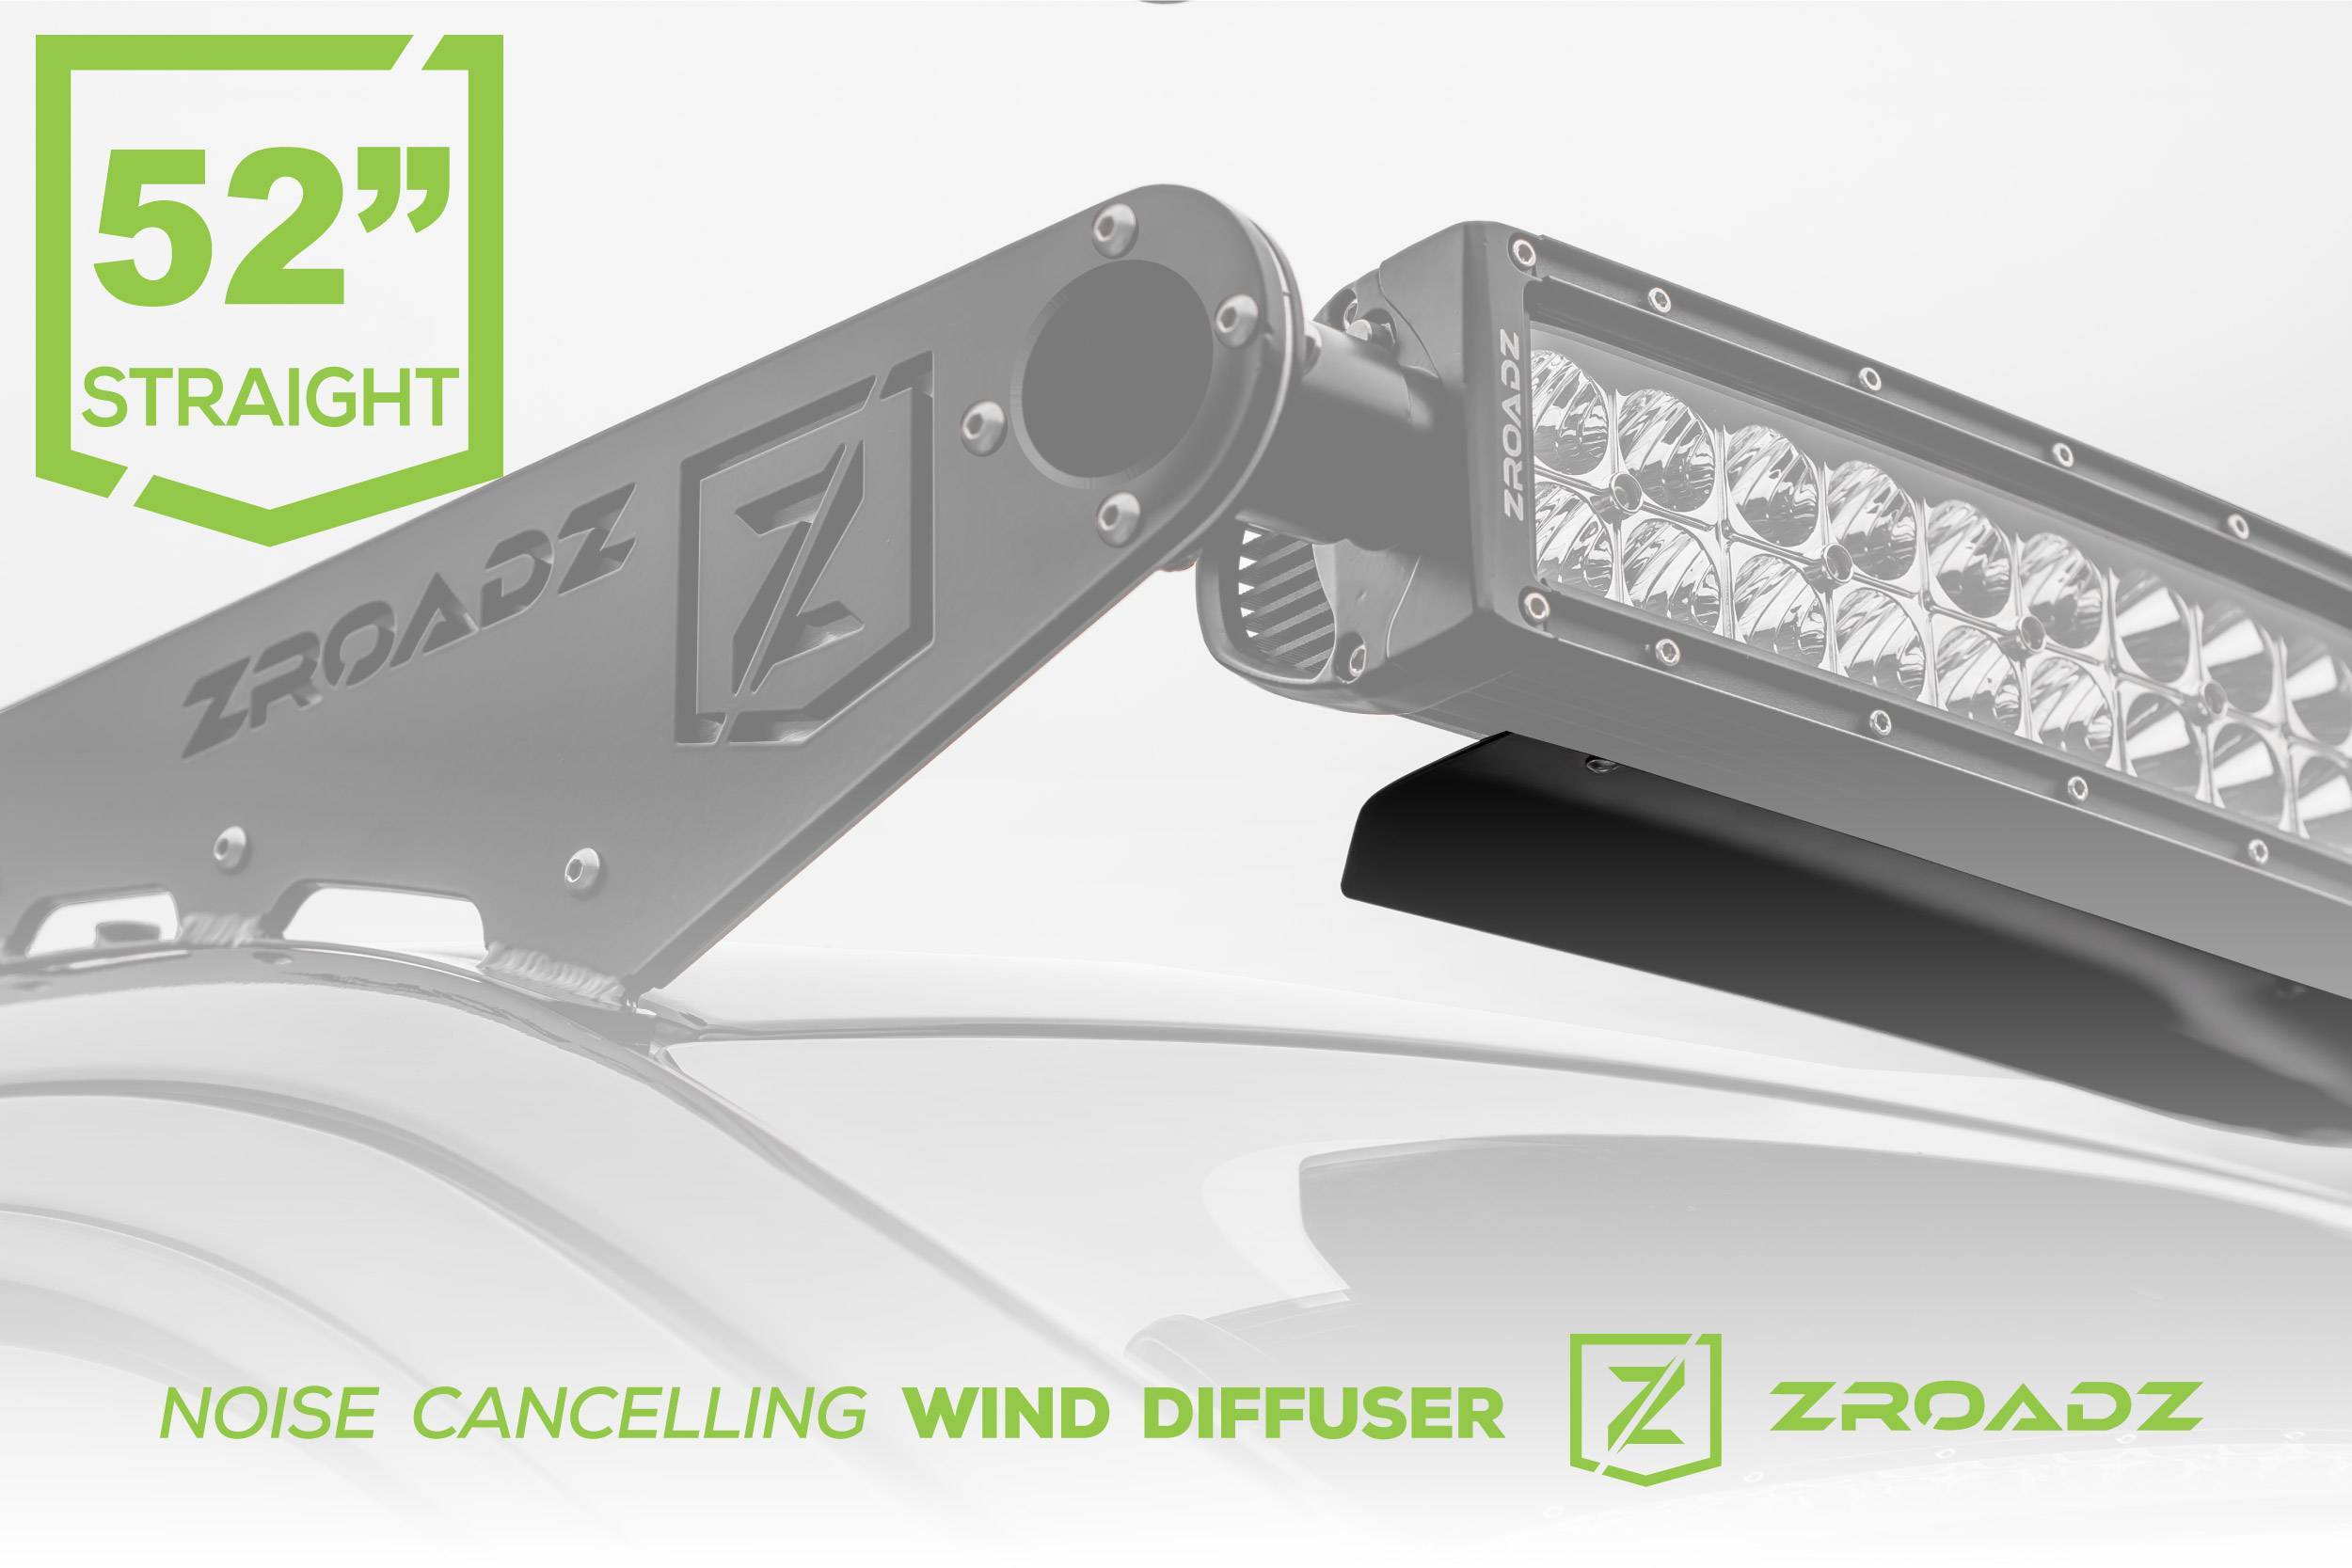 ZROADZ OFF ROAD PRODUCTS - Noise Cancelling Wind Diffuser for 52 Inch Straight LED Light Bar - Part # Z330052S